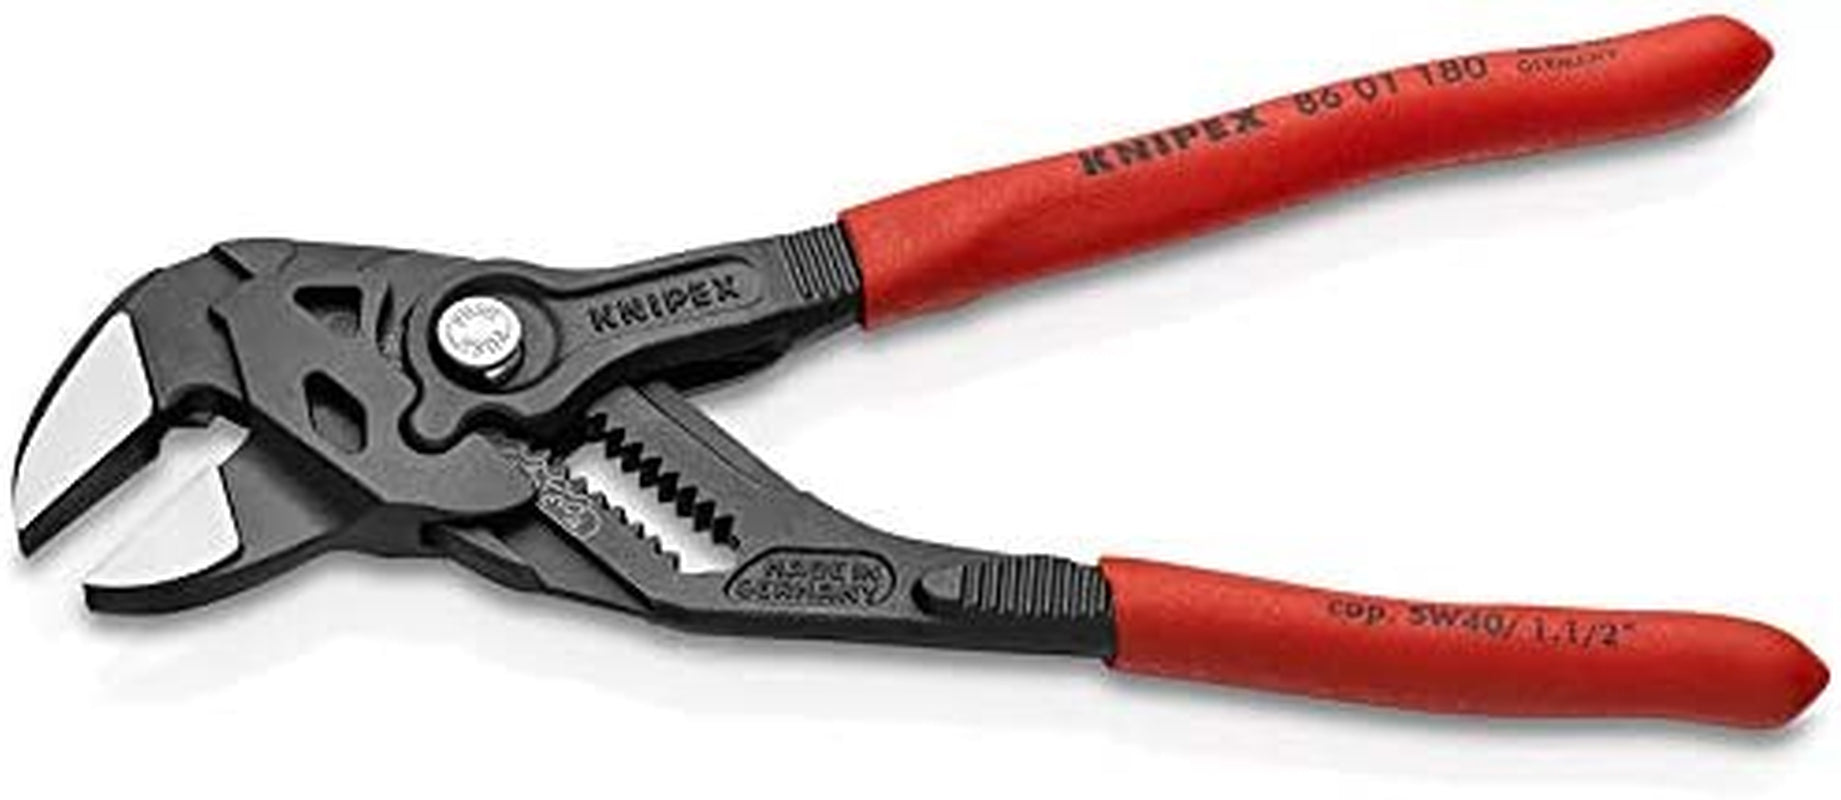 KNIPEX, KNIPEX Pliers Wrench Pliers and a Wrench in a Single Tool (180 Mm) 86 01 180, Red